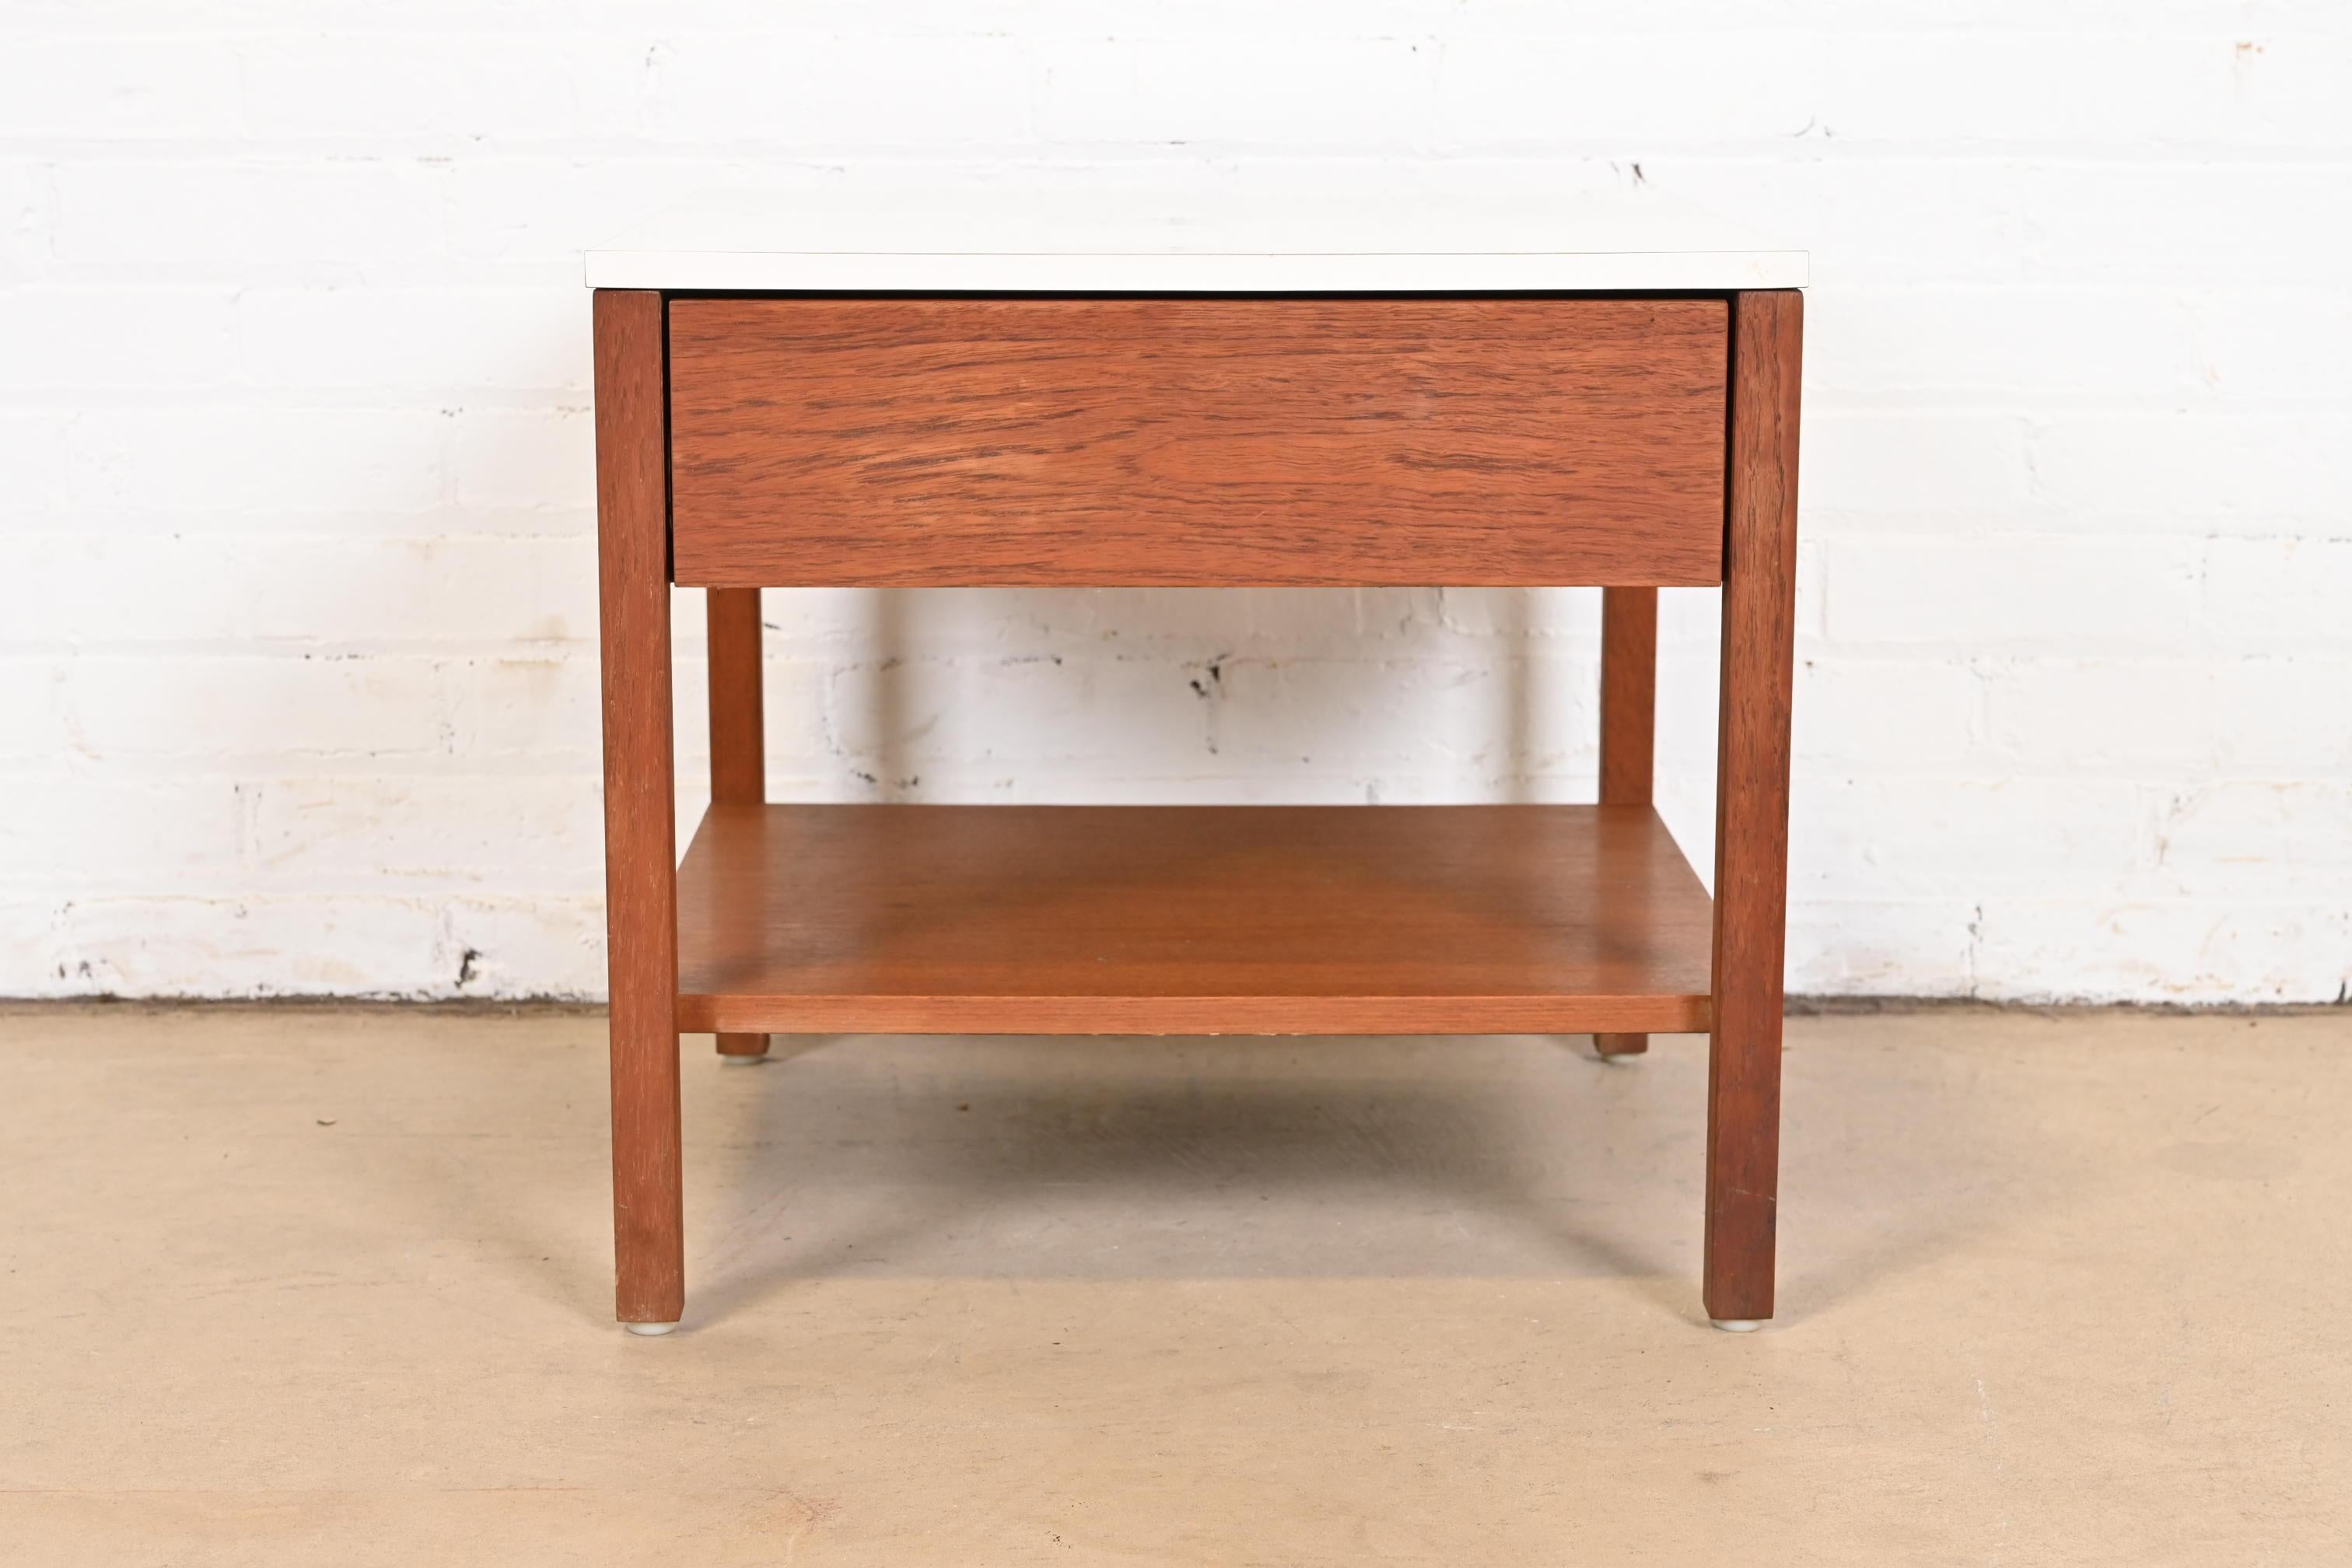 American Florence Knoll Mid-Century Modern Walnut Nightstand or Side Table, circa 1960s